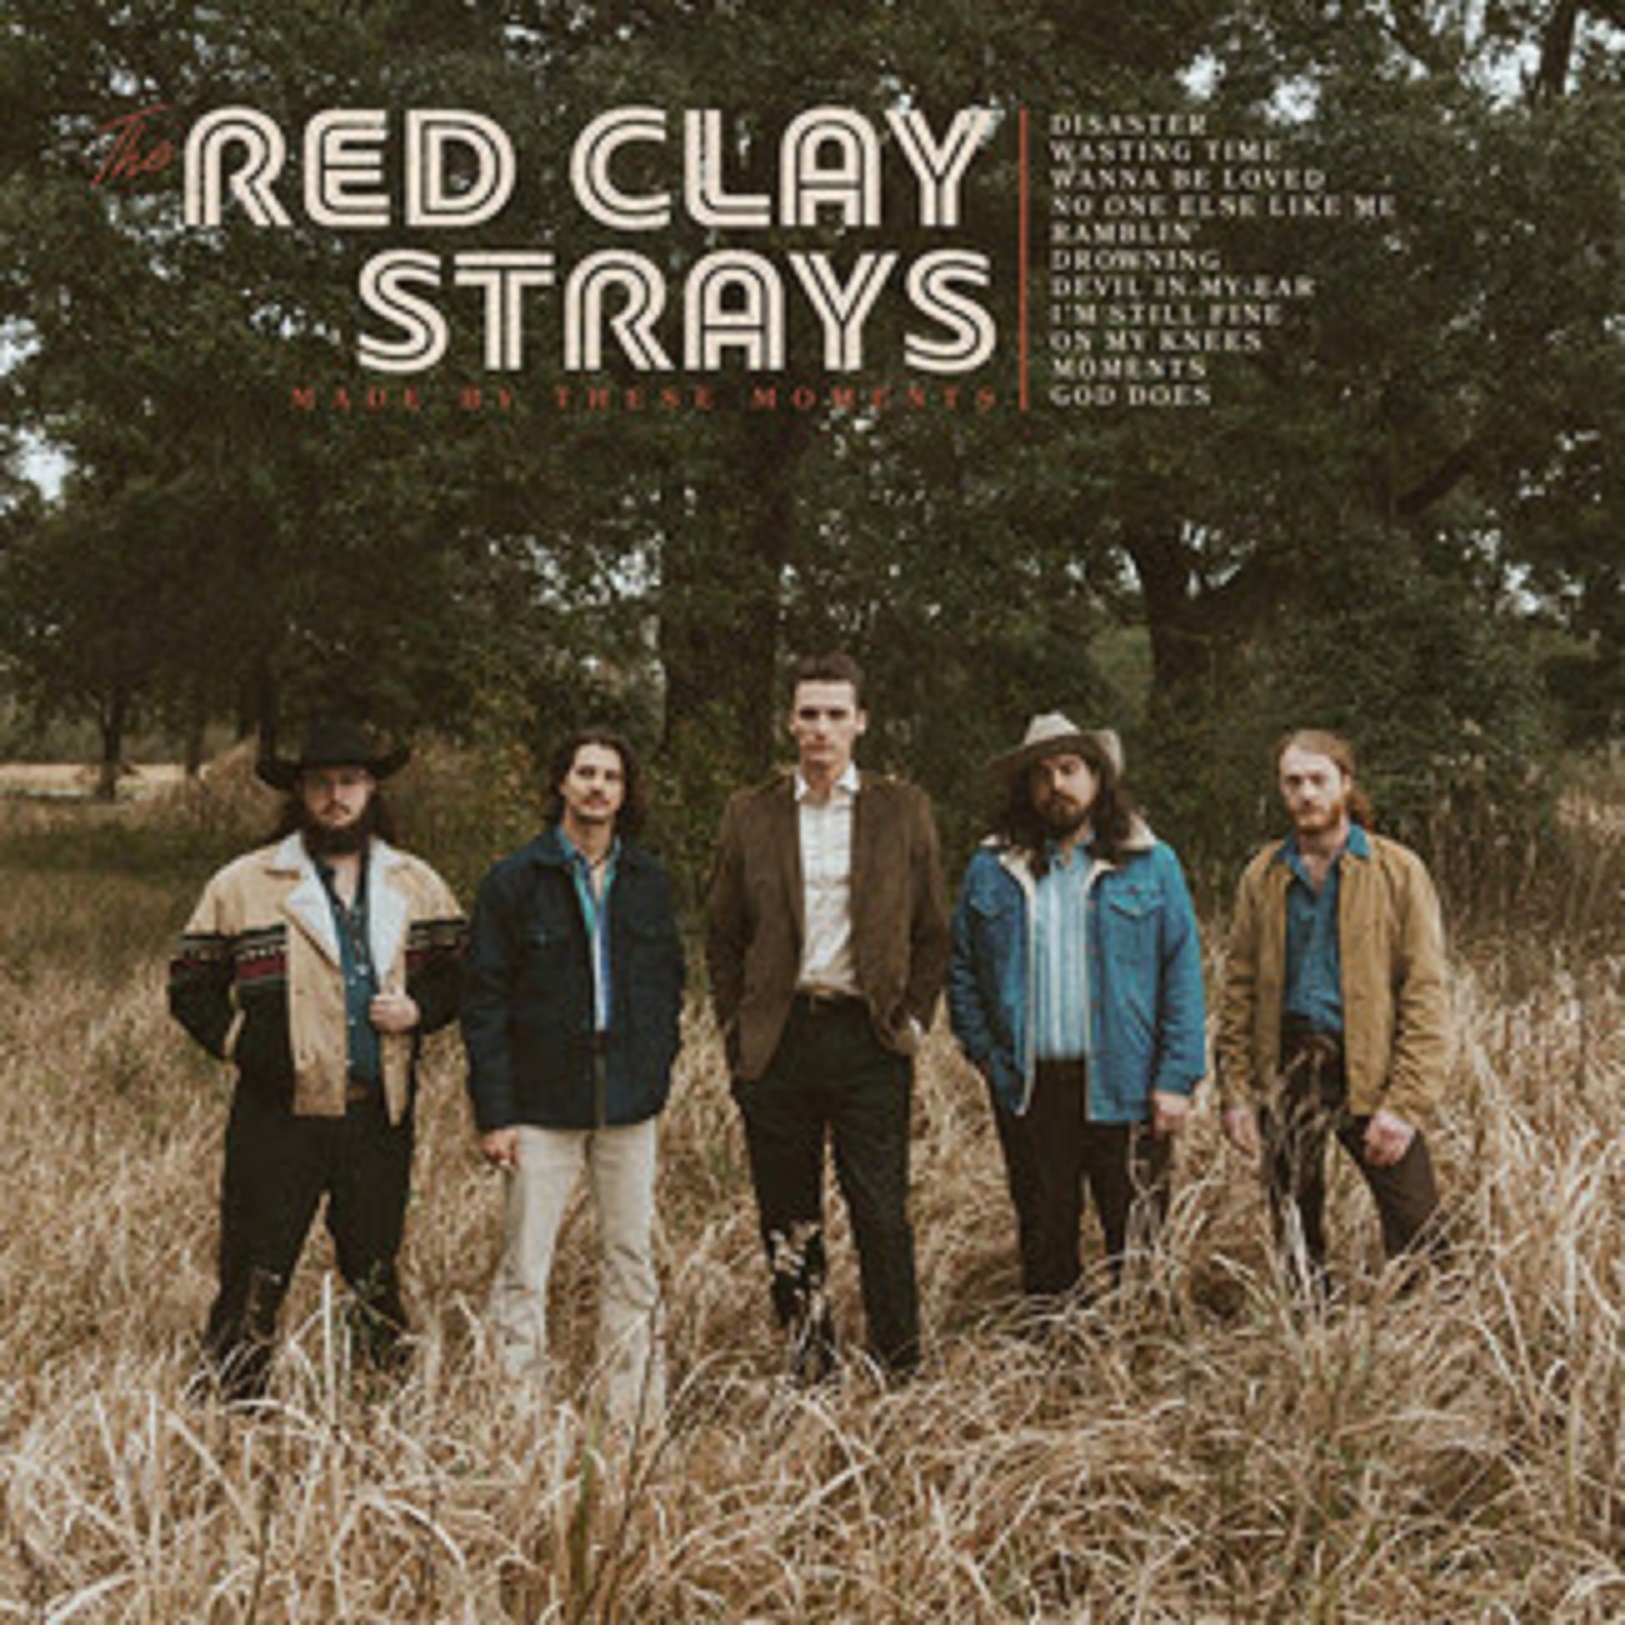 The Red Clay Strays’ new song “Drowning” debuts today